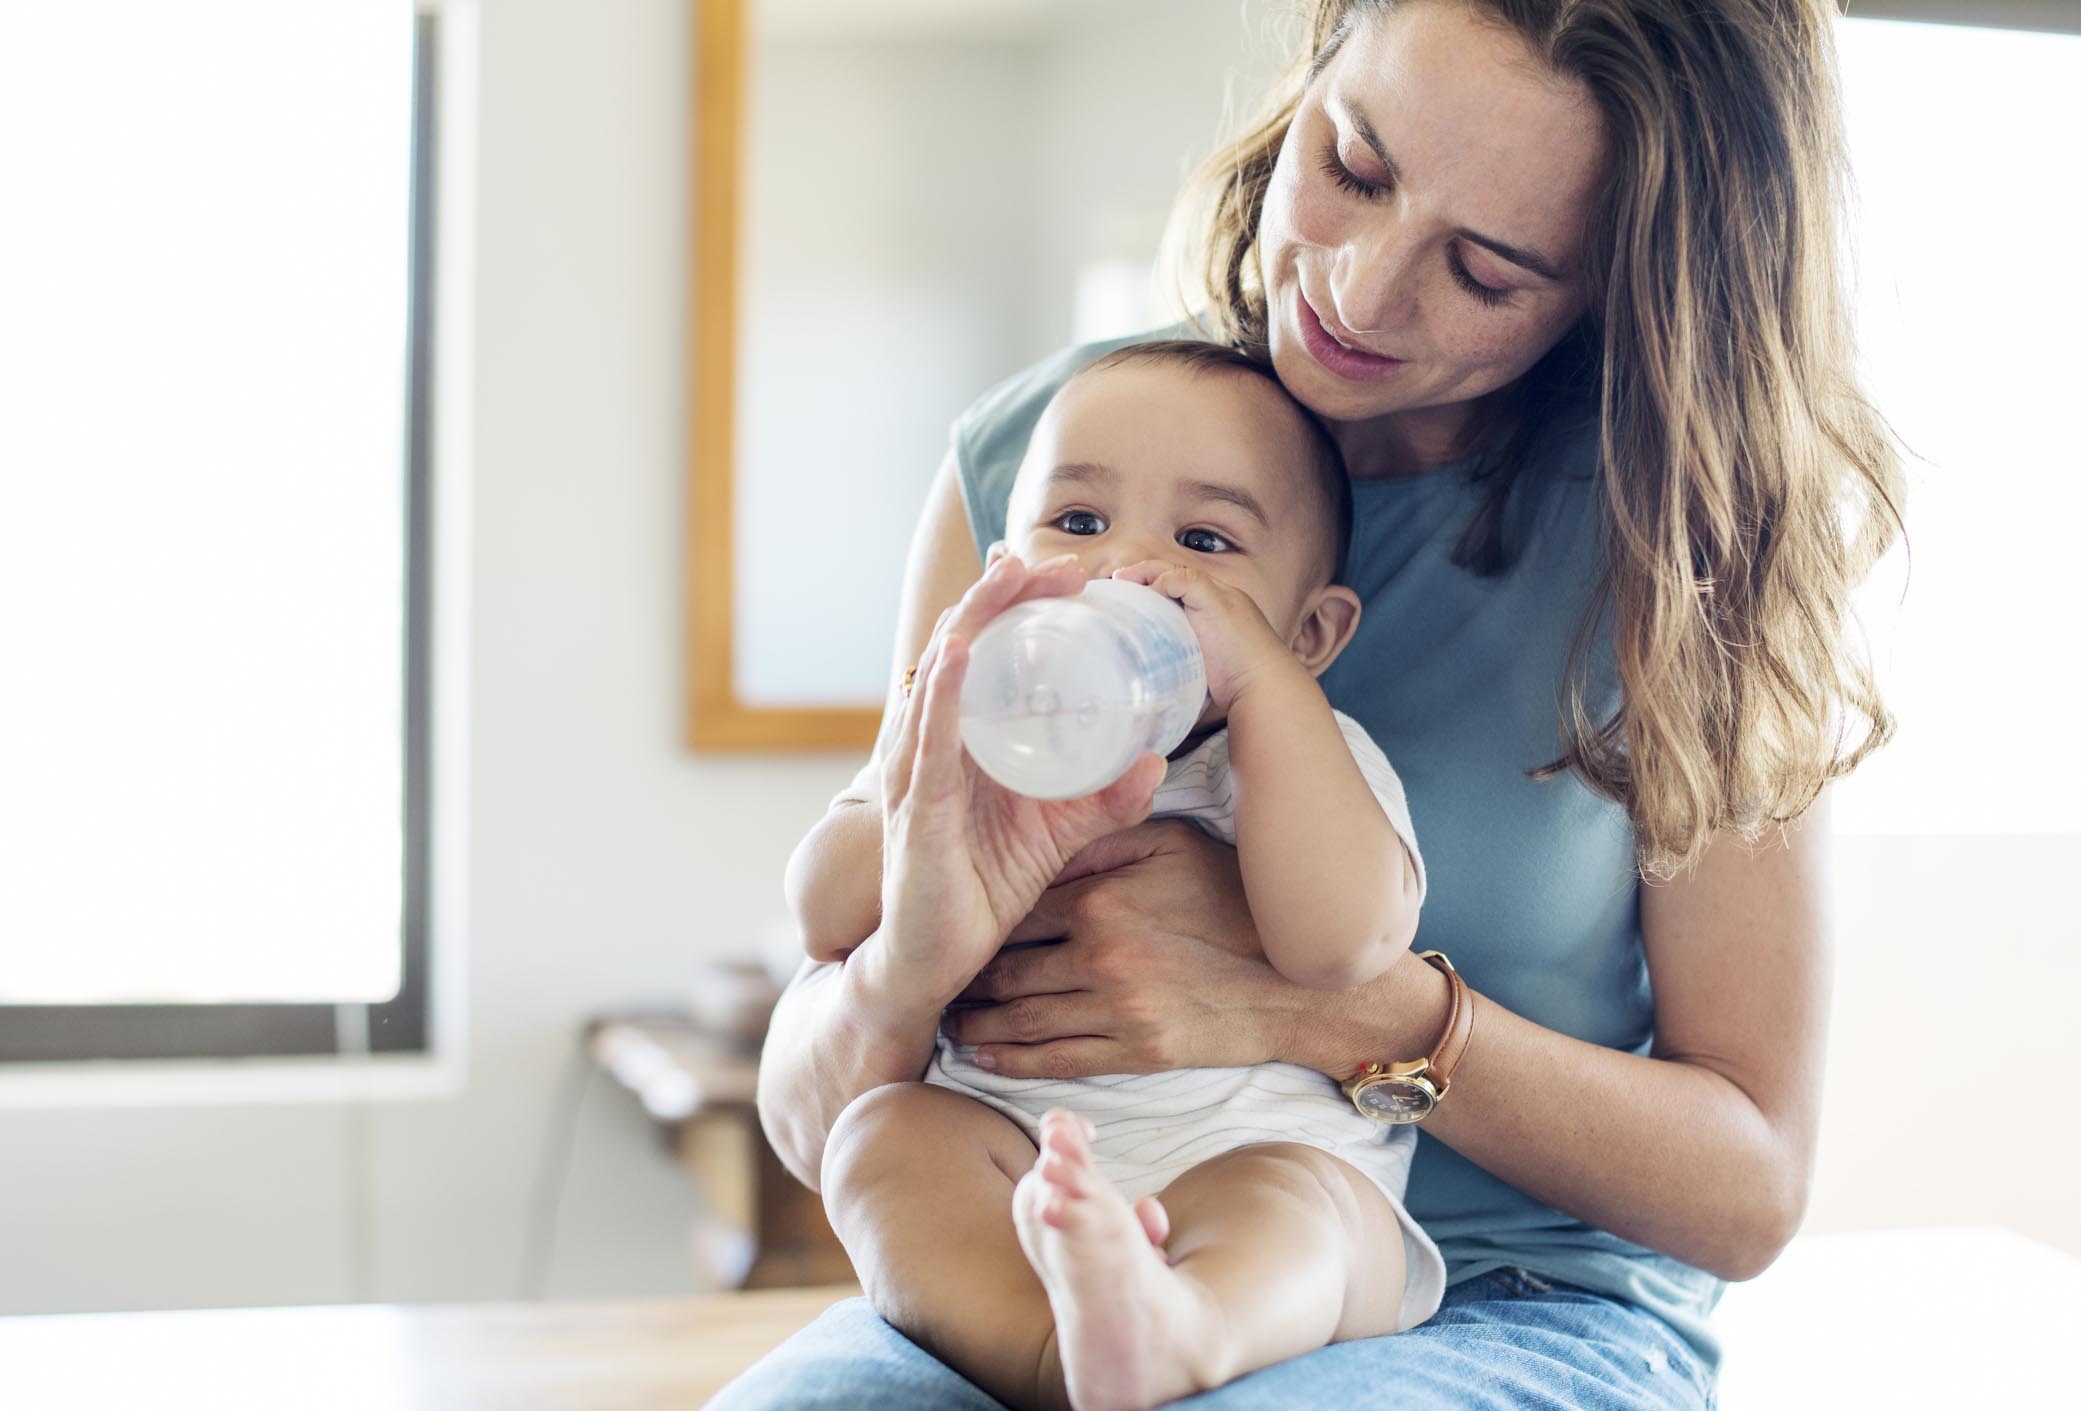 How to stop breastfeeding: when is the right time to stop breastfeeding